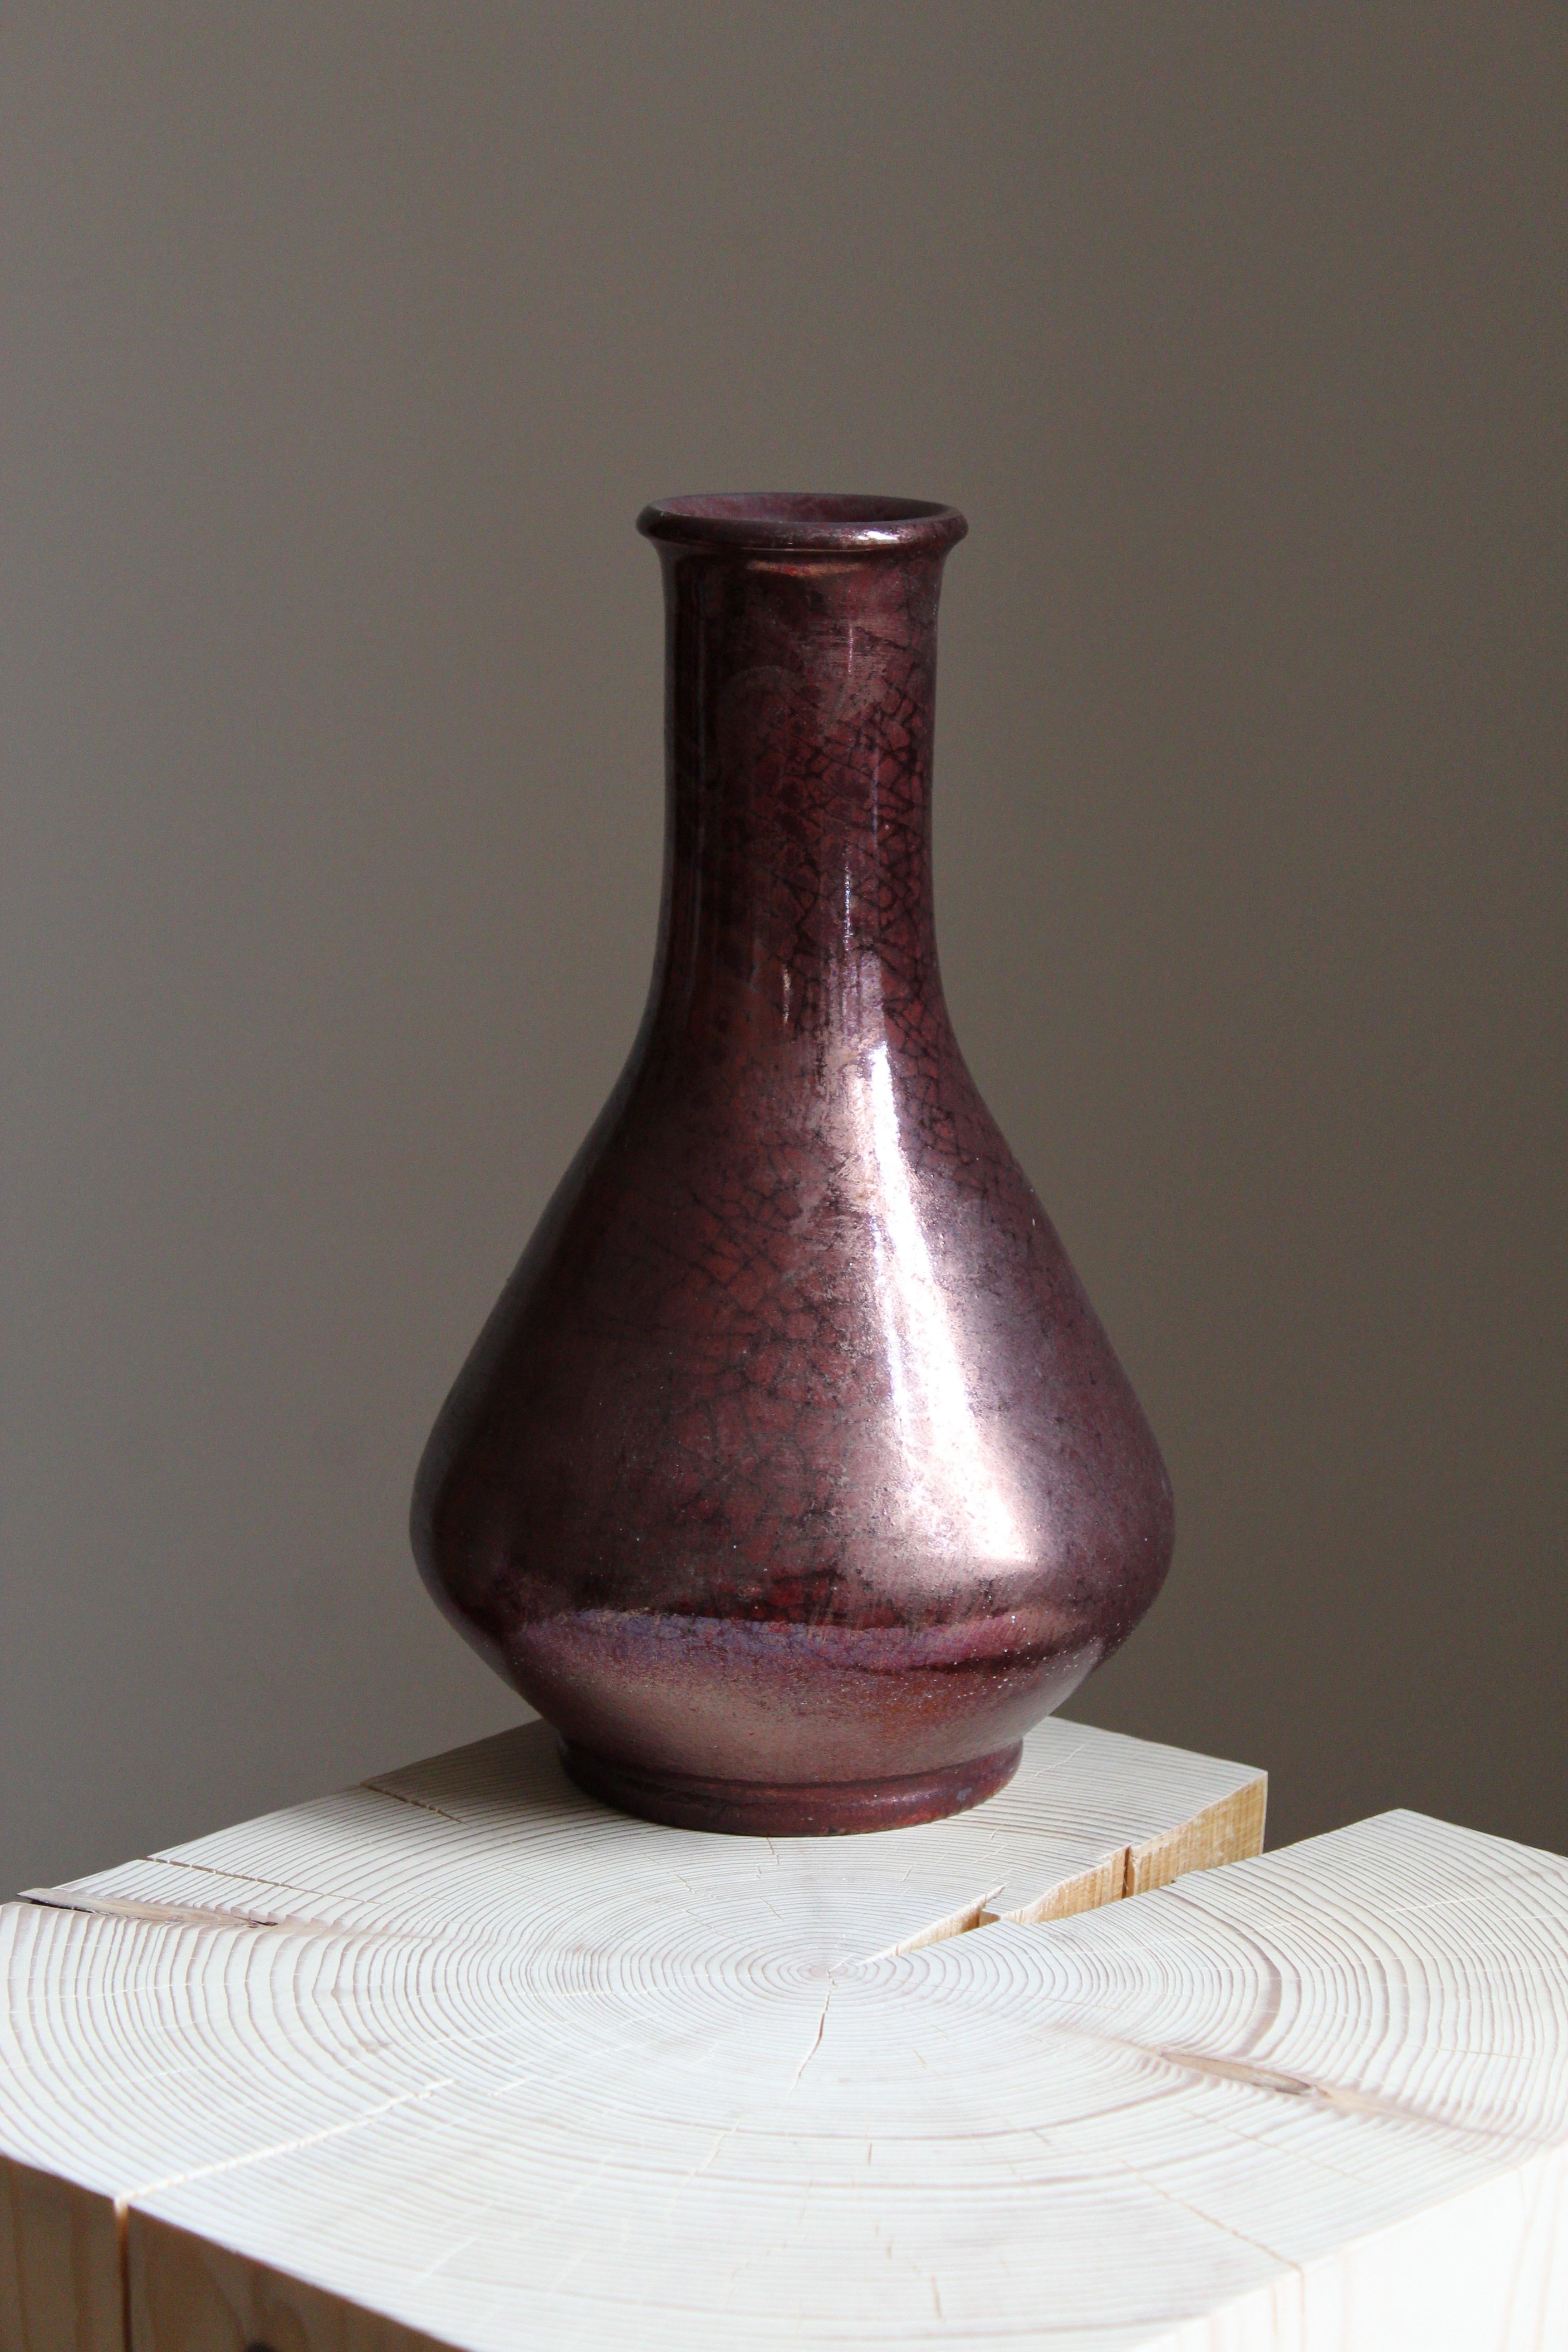 A sizable vase. Designed and produced by Herman Kähler. Signed HAK. 

As is Kählers signature, the clay was sourced on the island of Bornholm. On this vase, a highly complex and artistic oxblood glaze has been applied.

Kähler is an important